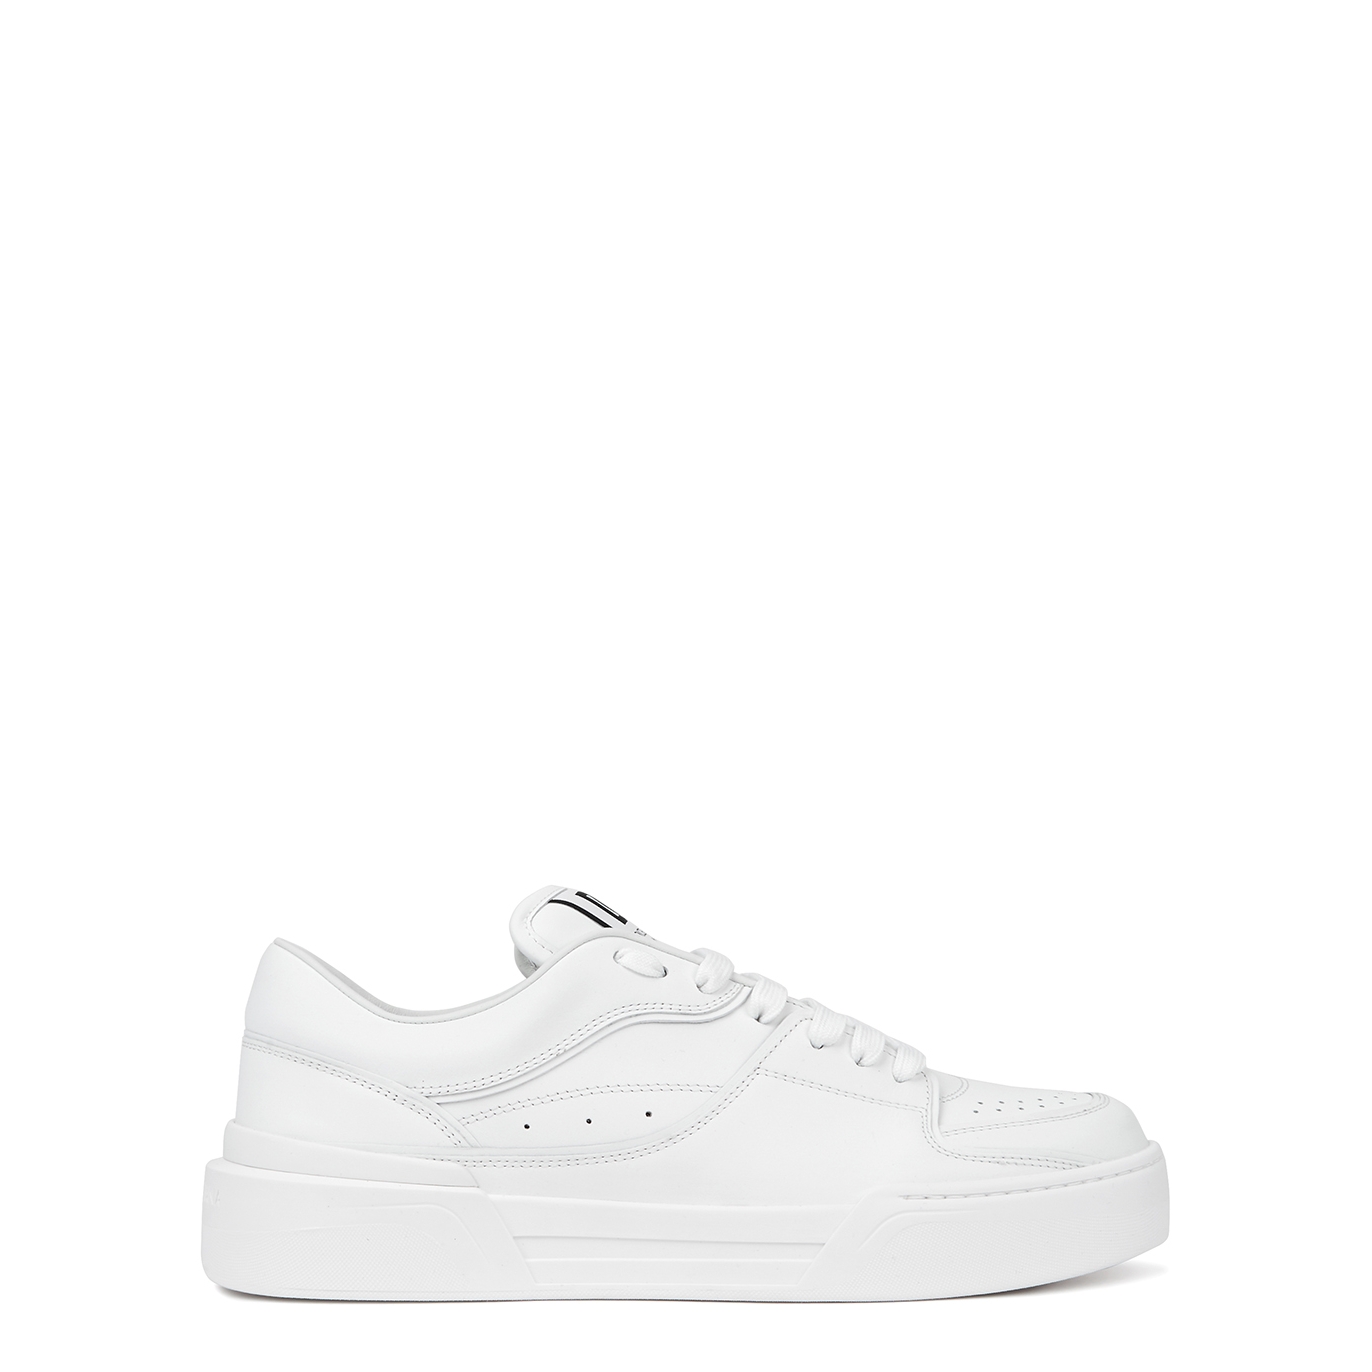 Dolce & Gabbana New Roma White Leather Sneakers - 6